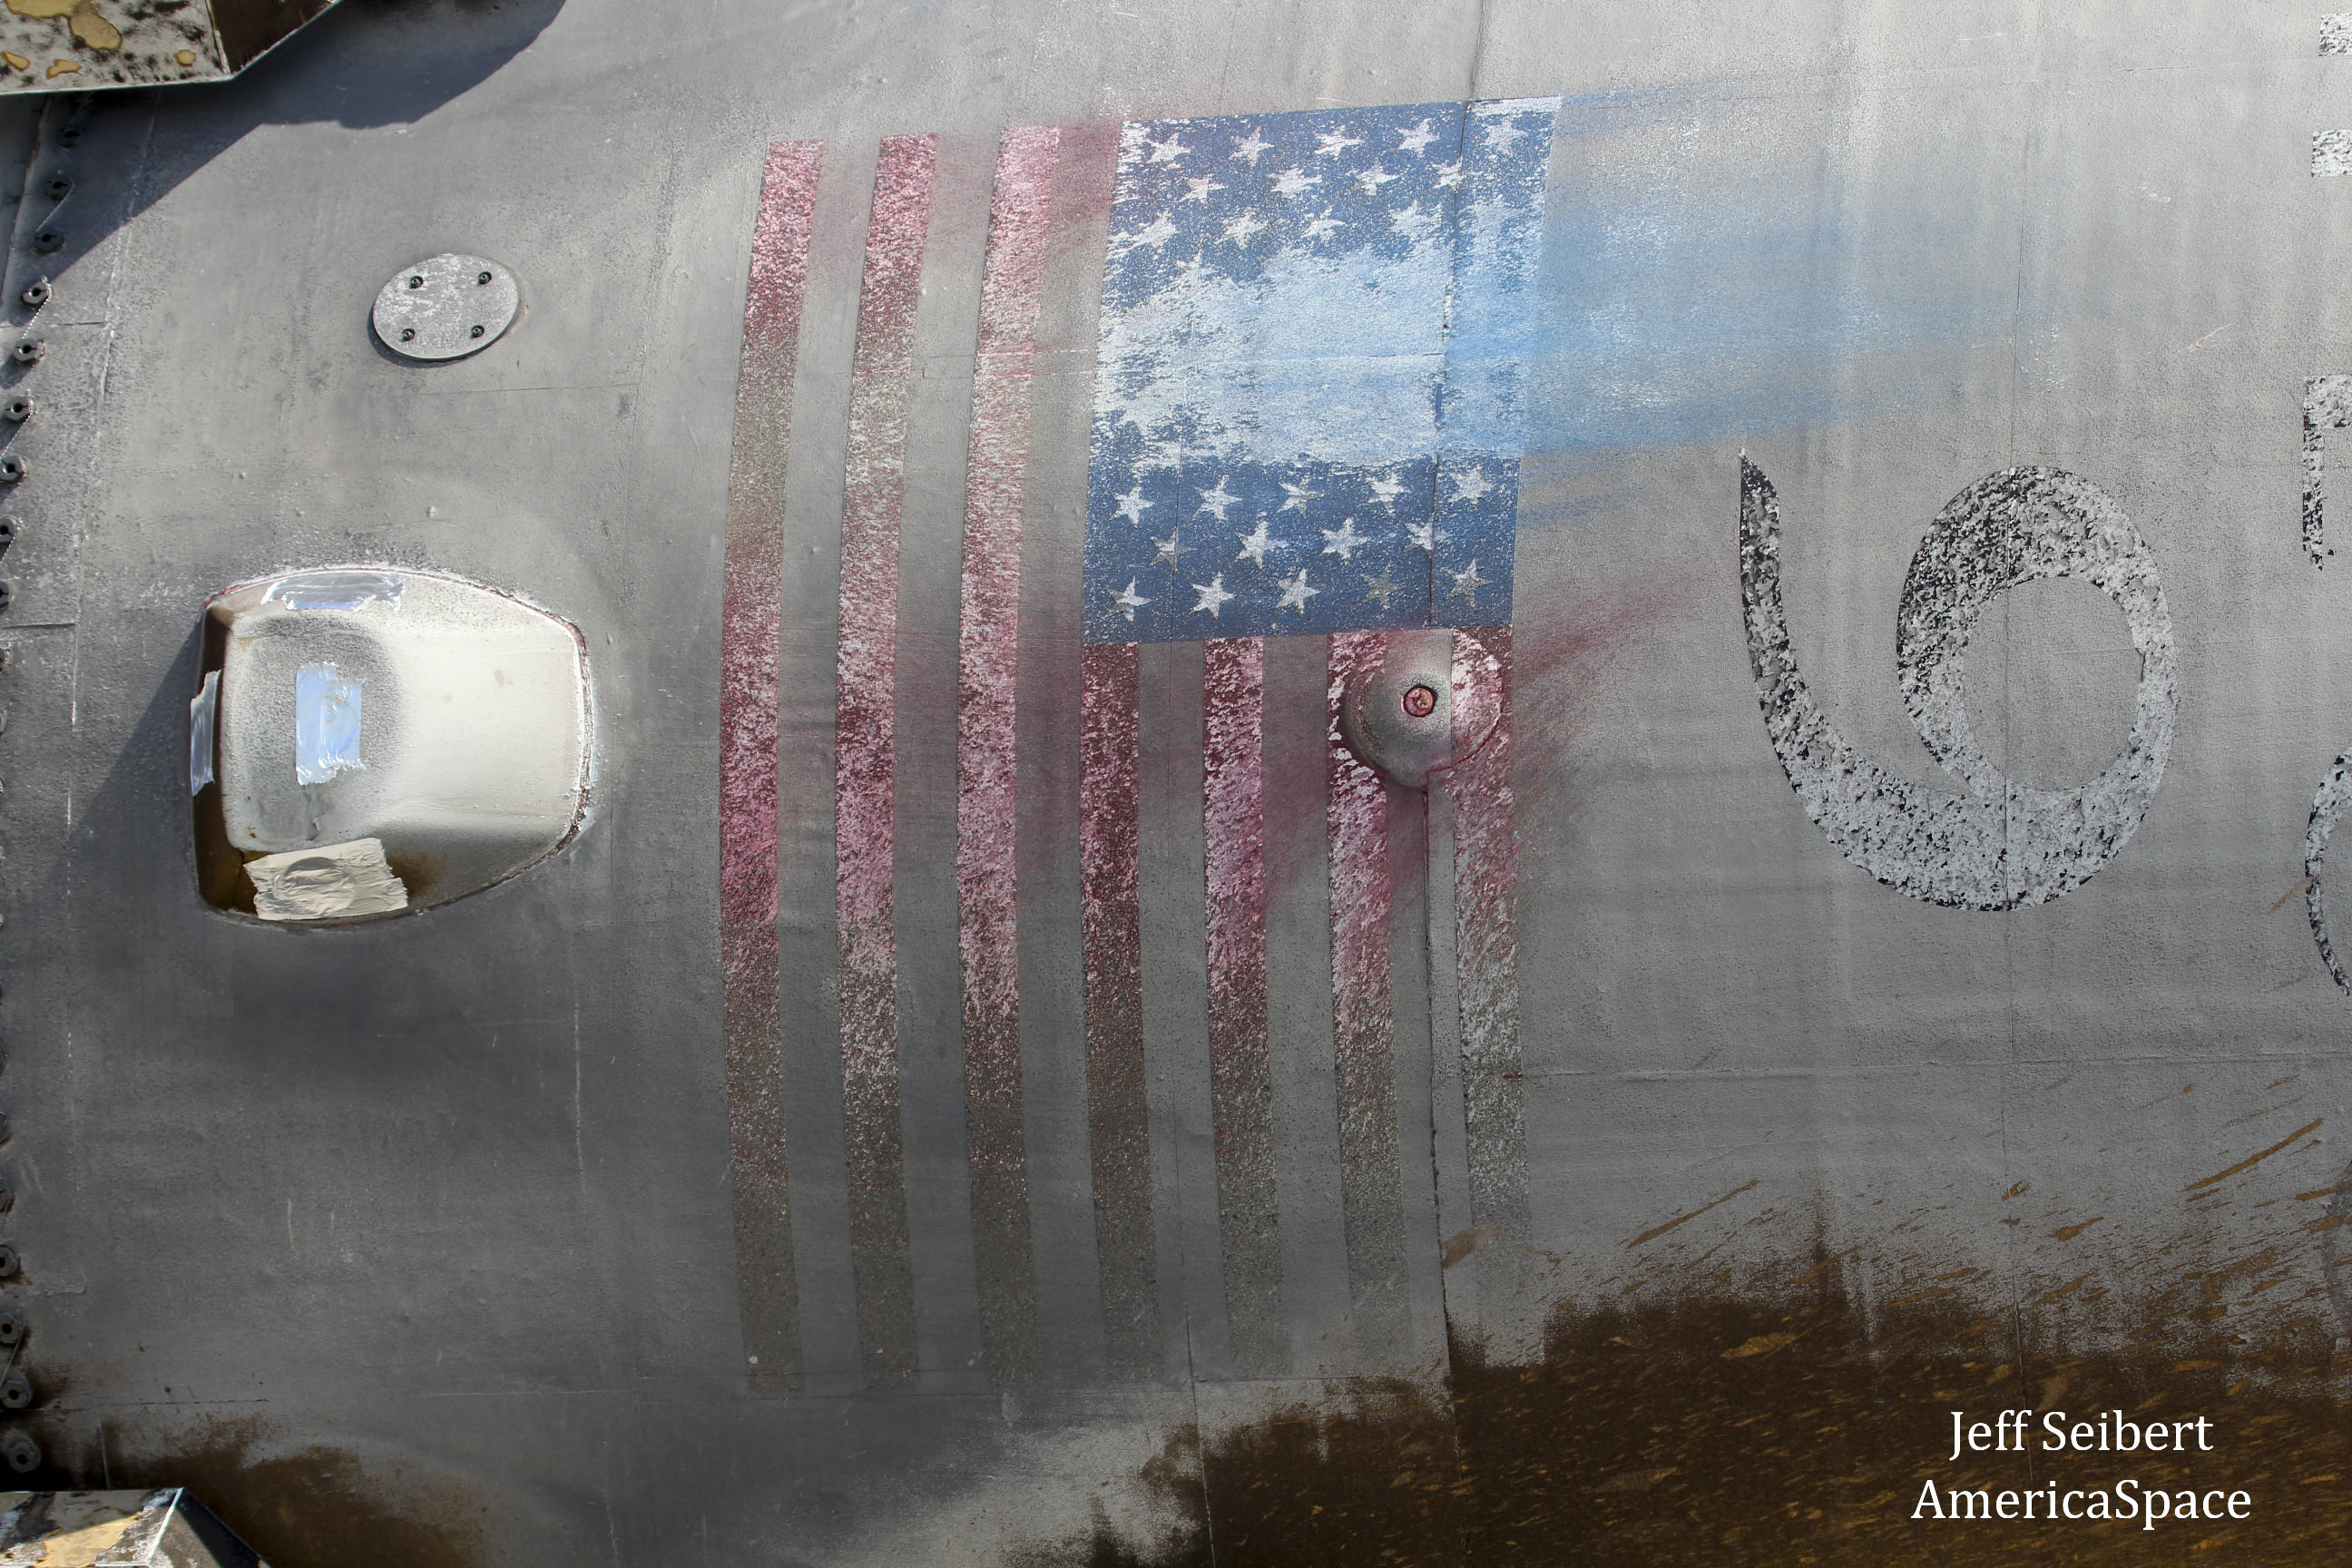 Scorched skin and US flag on recovered SpaceX first stage booster during roll  to SpaceX hanger at Kennedy Space Center, Florida on May 16, 2016.  Credit: Jeff Seibert/AmericaSpace